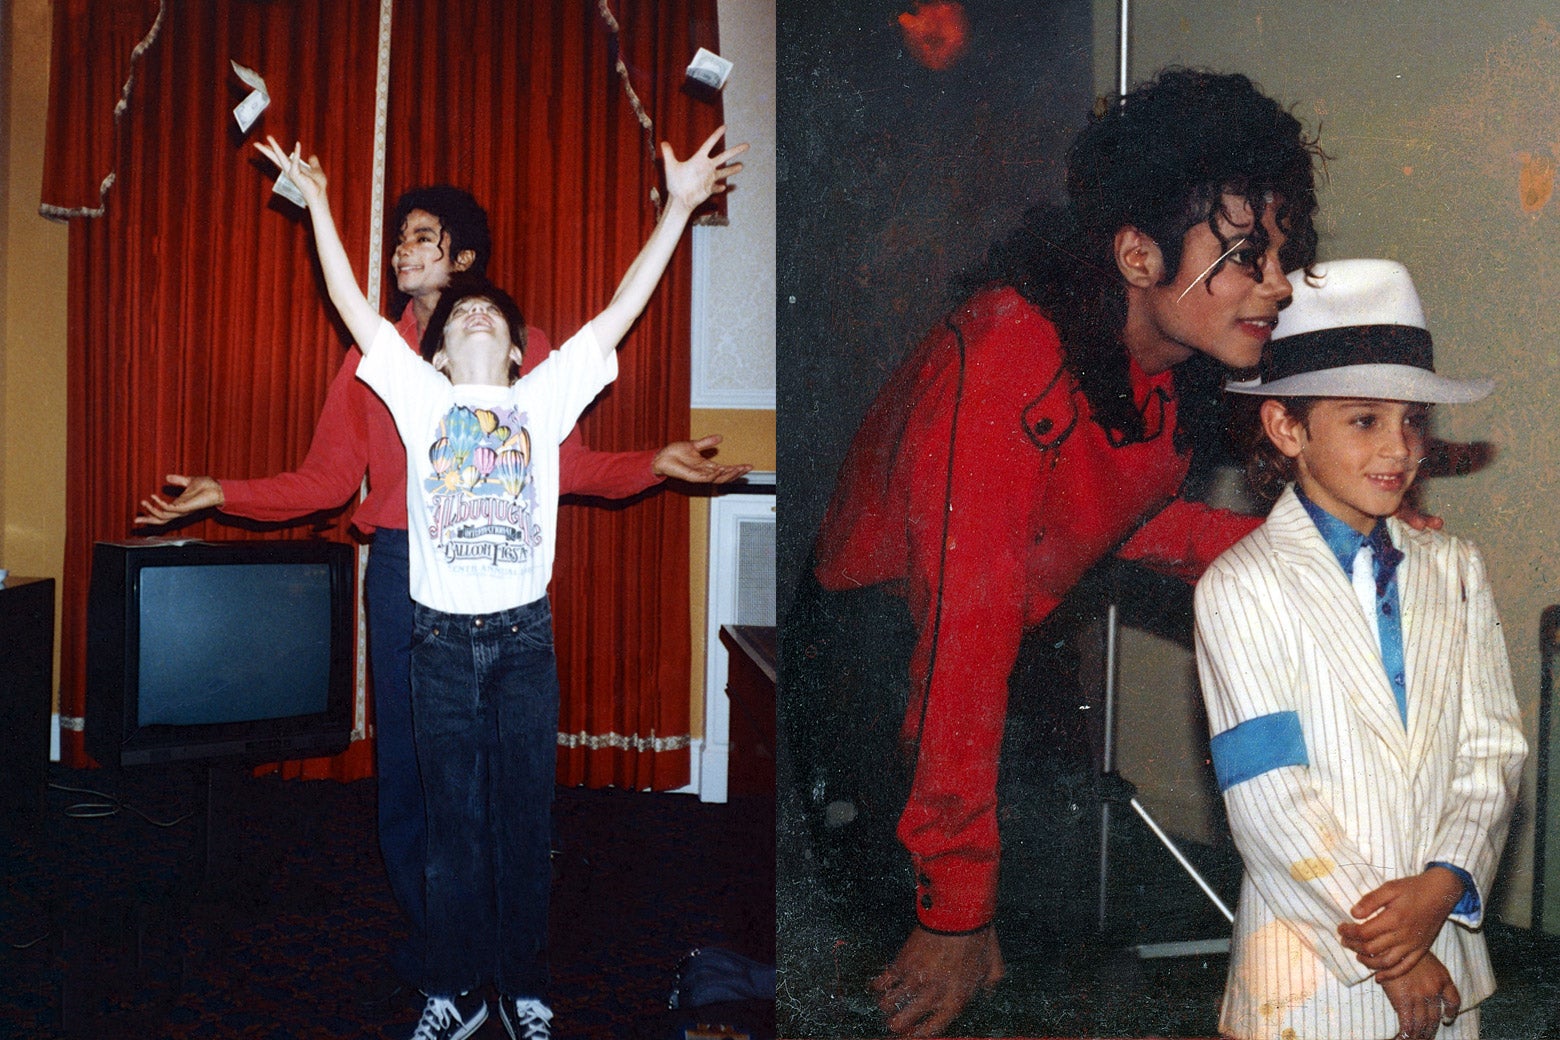 Michael Jackson with James Safechuck and Michael Jackson with Wade Robson.